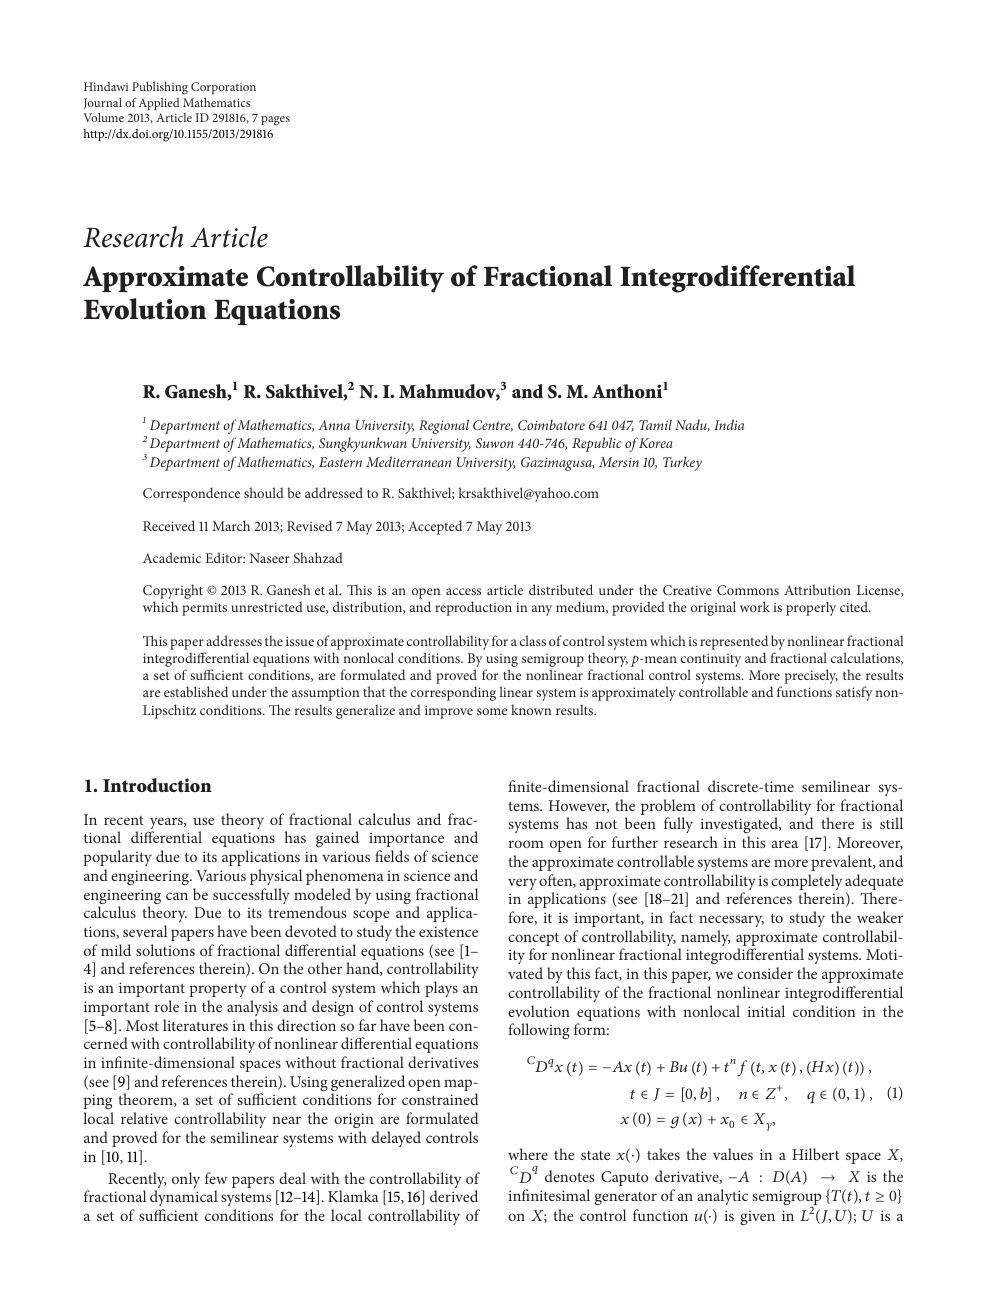 Approximate Controllability Of Fractional Integrodifferential Evolution Equations Topic Of Research Paper In Mathematics Download Scholarly Article Pdf And Read For Free On Cyberleninka Open Science Hub